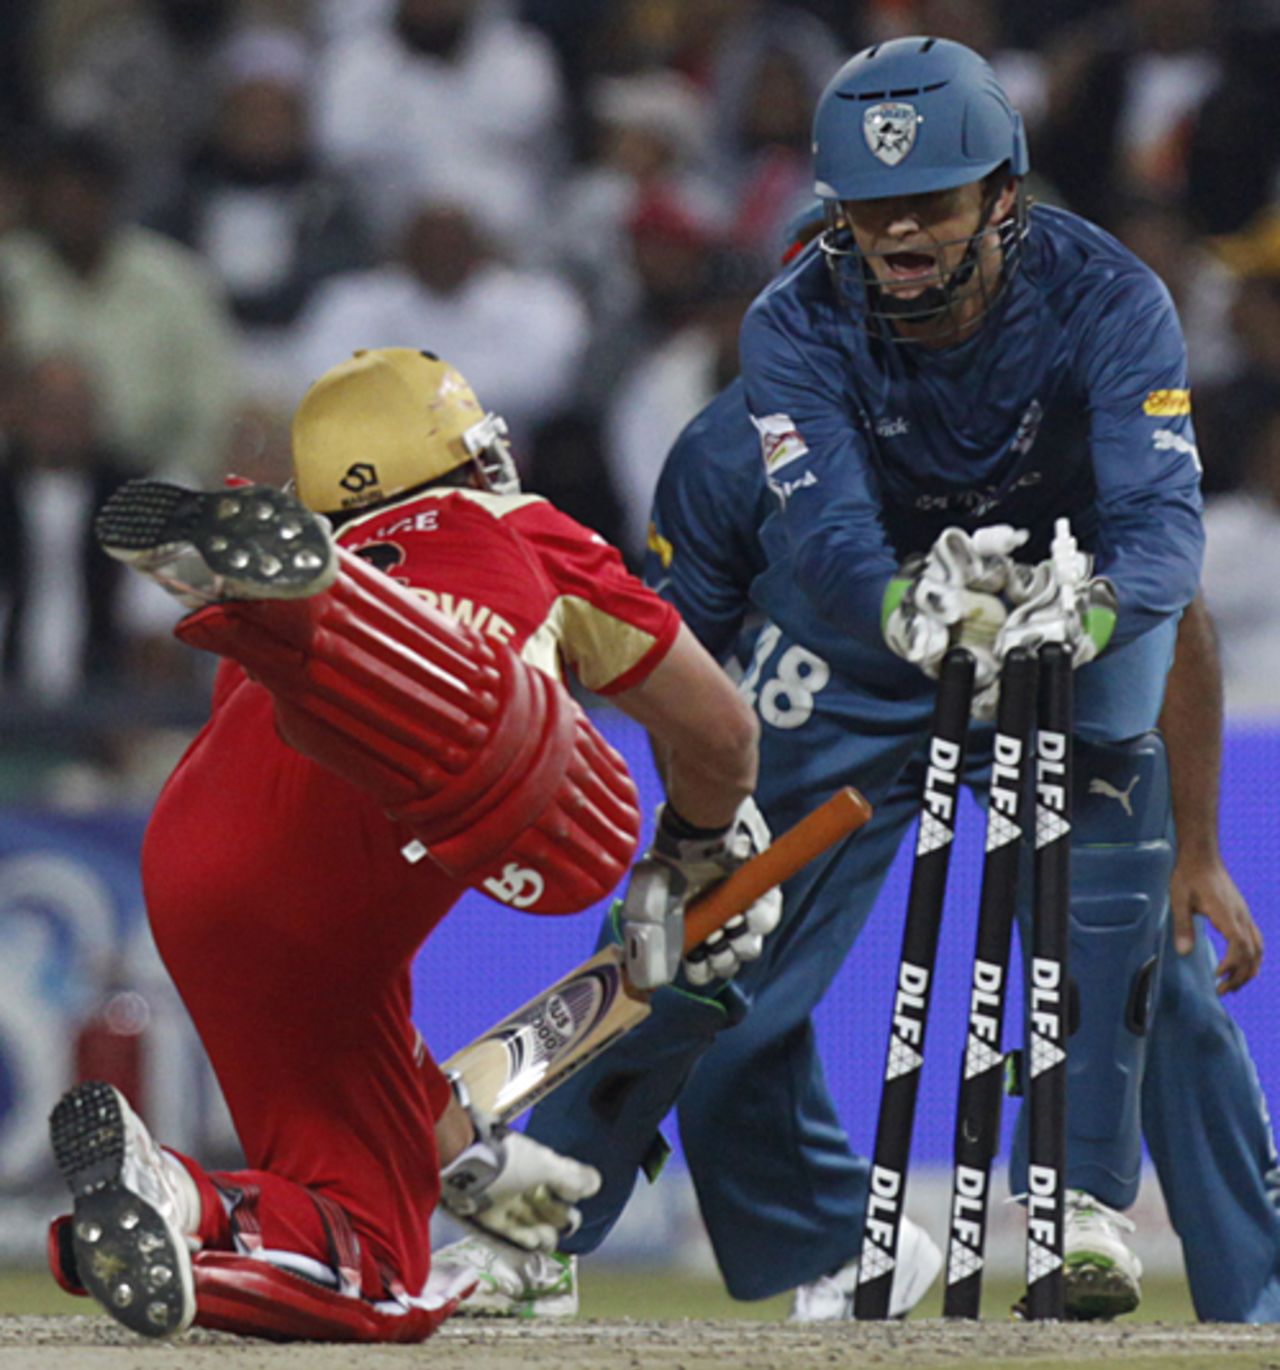 Quick glovework from Adam Gilchrist has Roelof van der Merwe short of his crease, Royal Challengers Bangalore v Deccan Chargers, IPL, final, Johannesburg, May 24, 2009